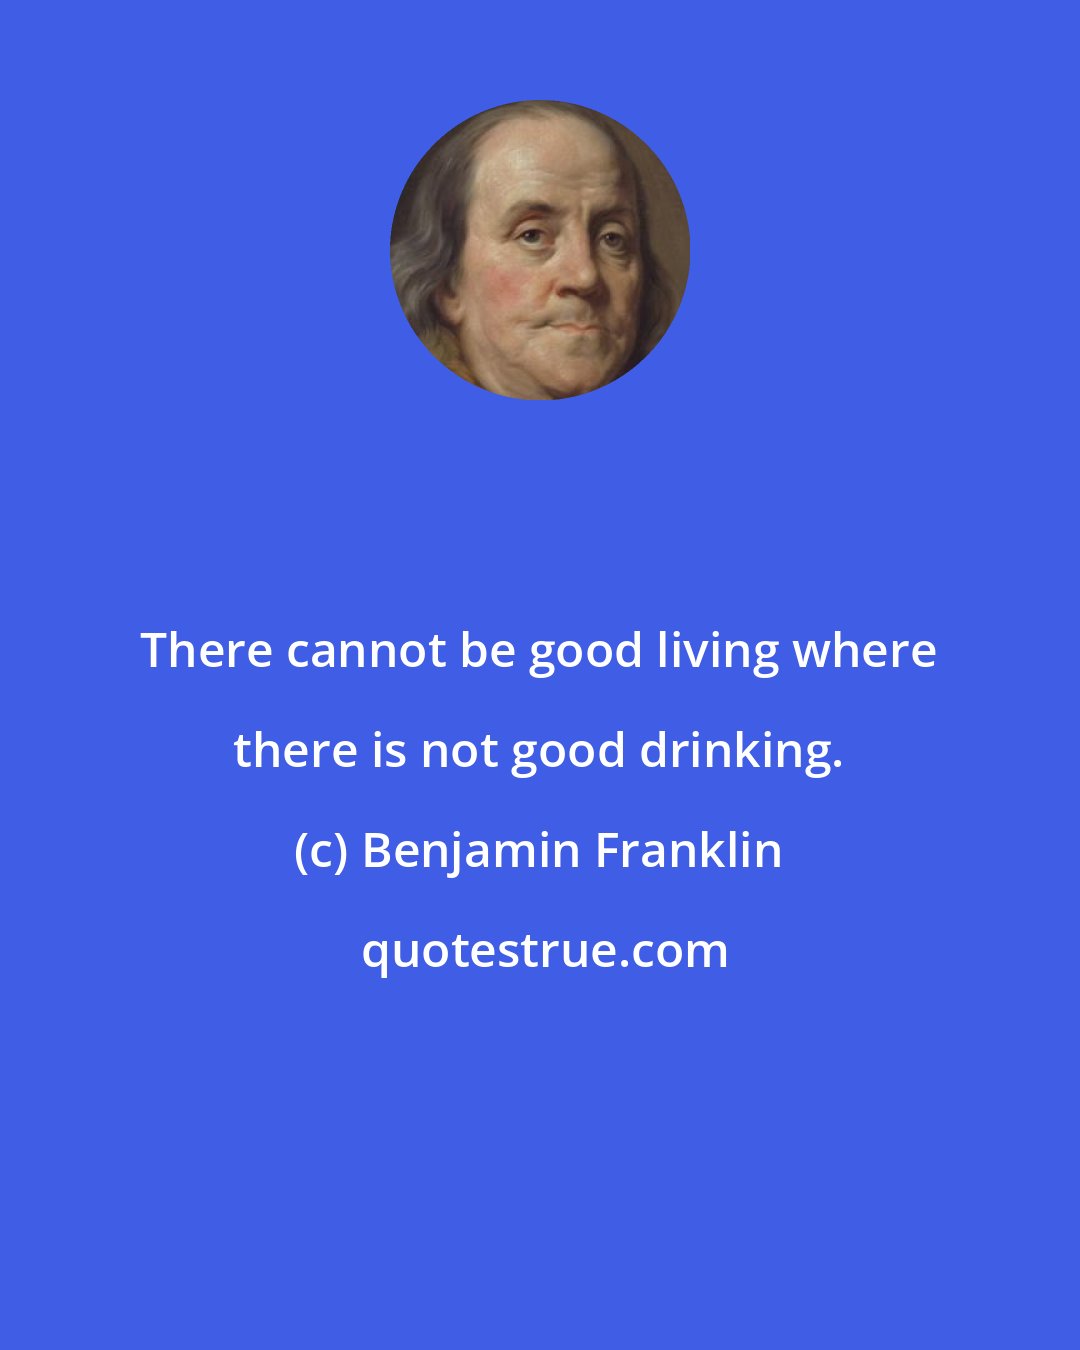 Benjamin Franklin: There cannot be good living where there is not good drinking.